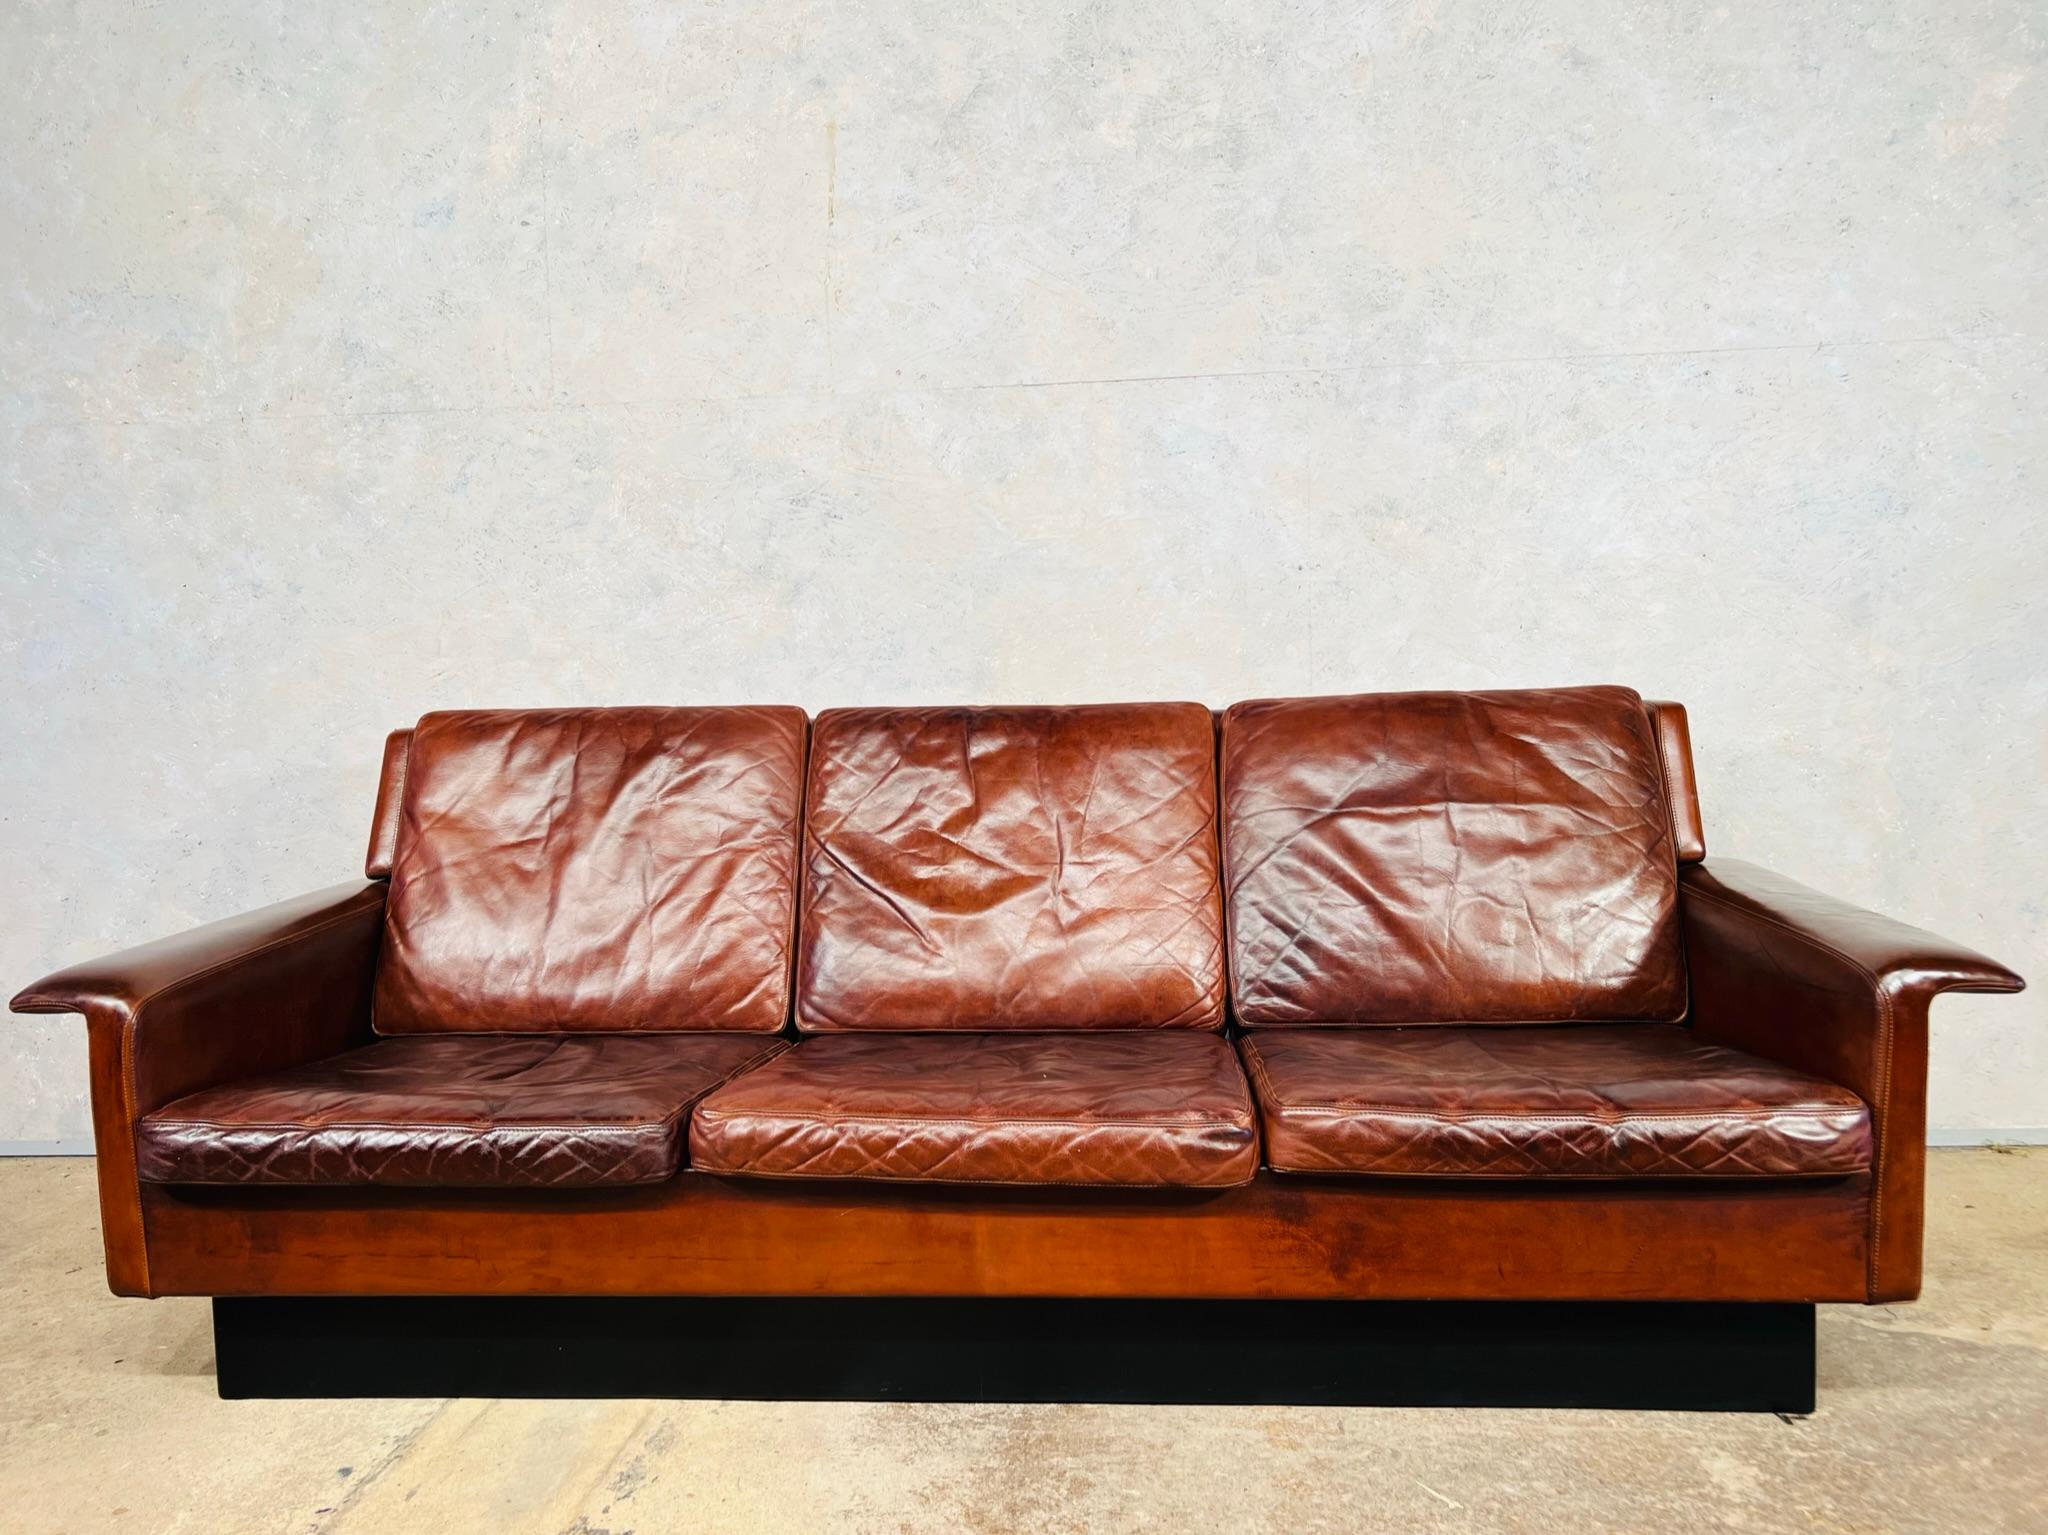 An Original Arne Vodder Three Seater Brown Leather Sofa For Fritz Hansen 1960.

Very stylish timeless design with a beautiful shape and great lines, the sofa sits beautifully and elegantly. The original leather has a beautiful patina.

Arne Vodder